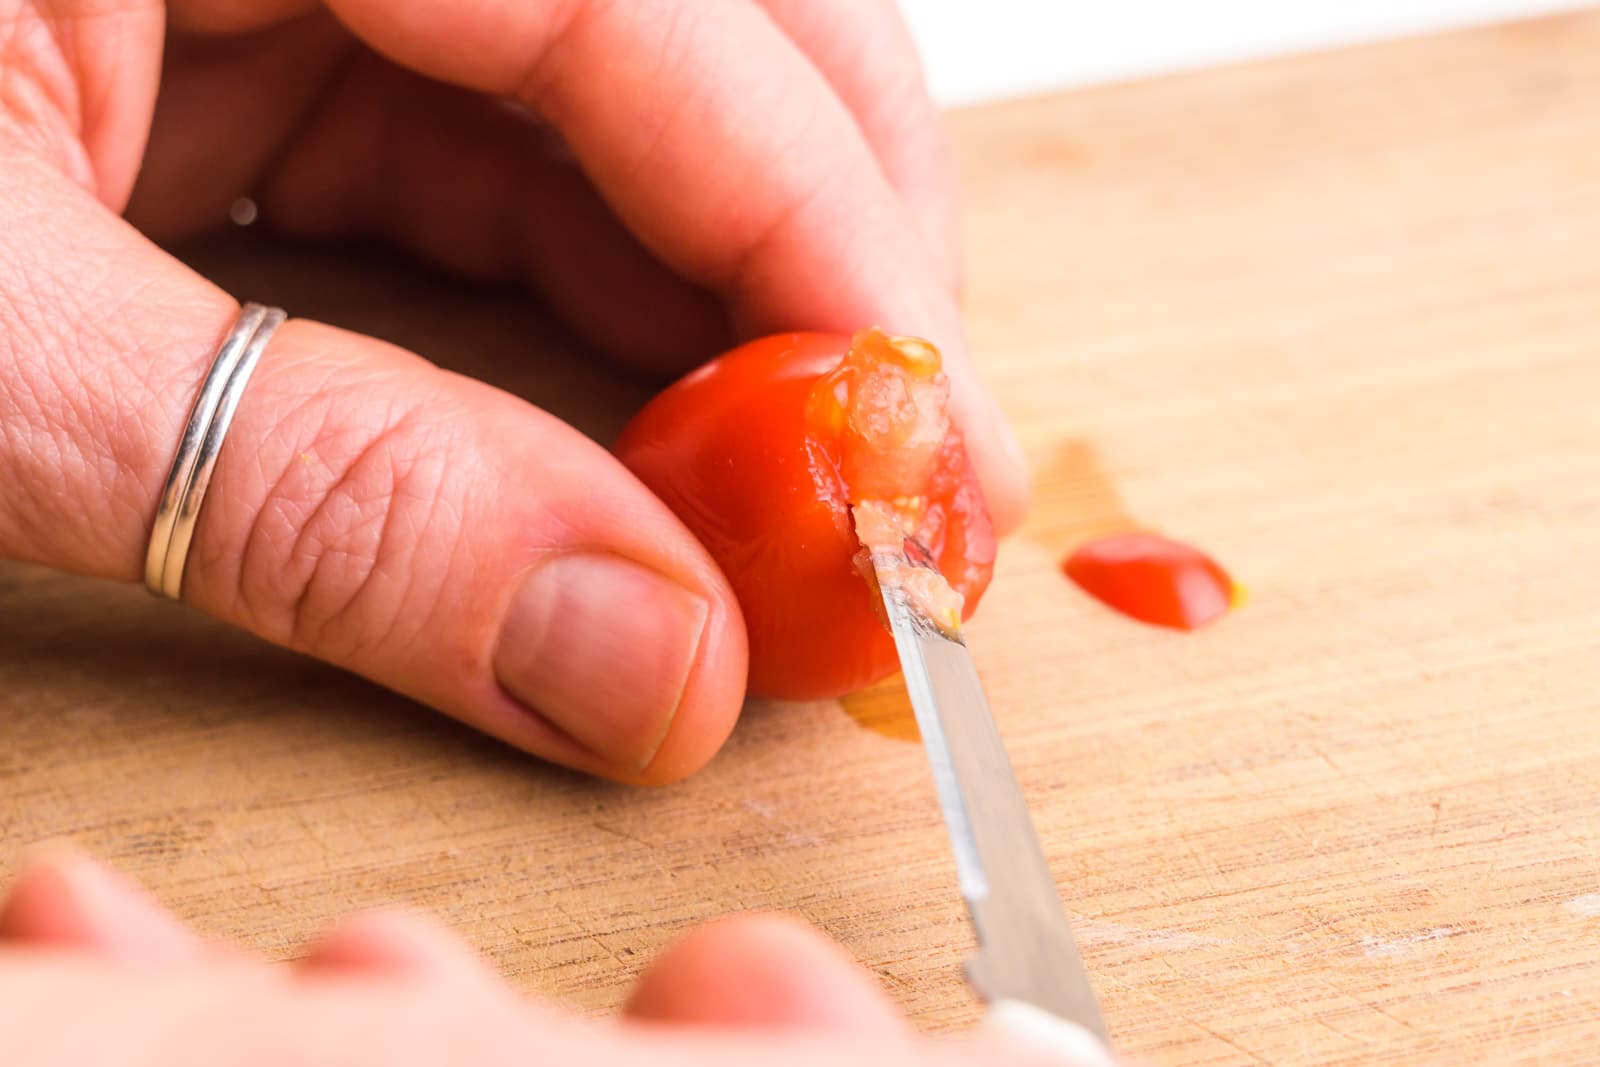 A hand holds a cherry tomato on its side on a cutting board. A paring knife is cutting out the insides of the tomato.